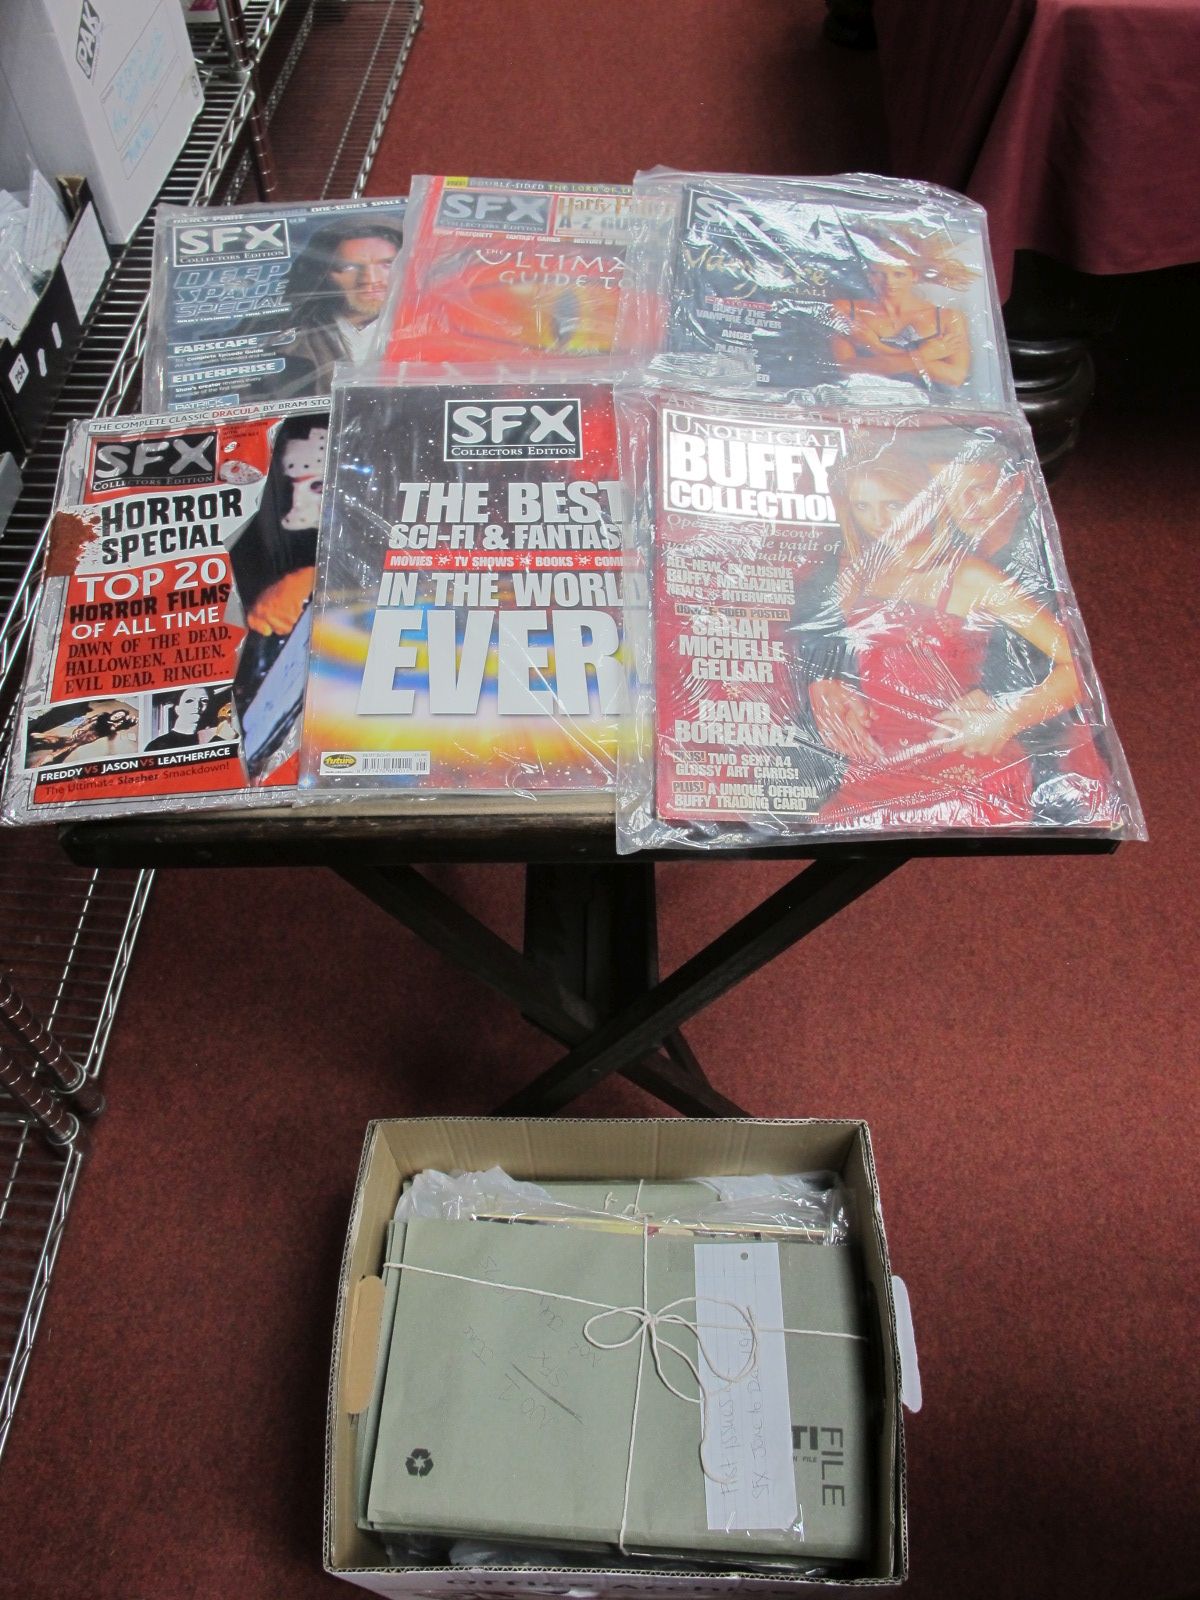 A Quantity of S.F.X Magazines, 95 - 96 - 1997, in cellophane, unchecked for complete runs:- One